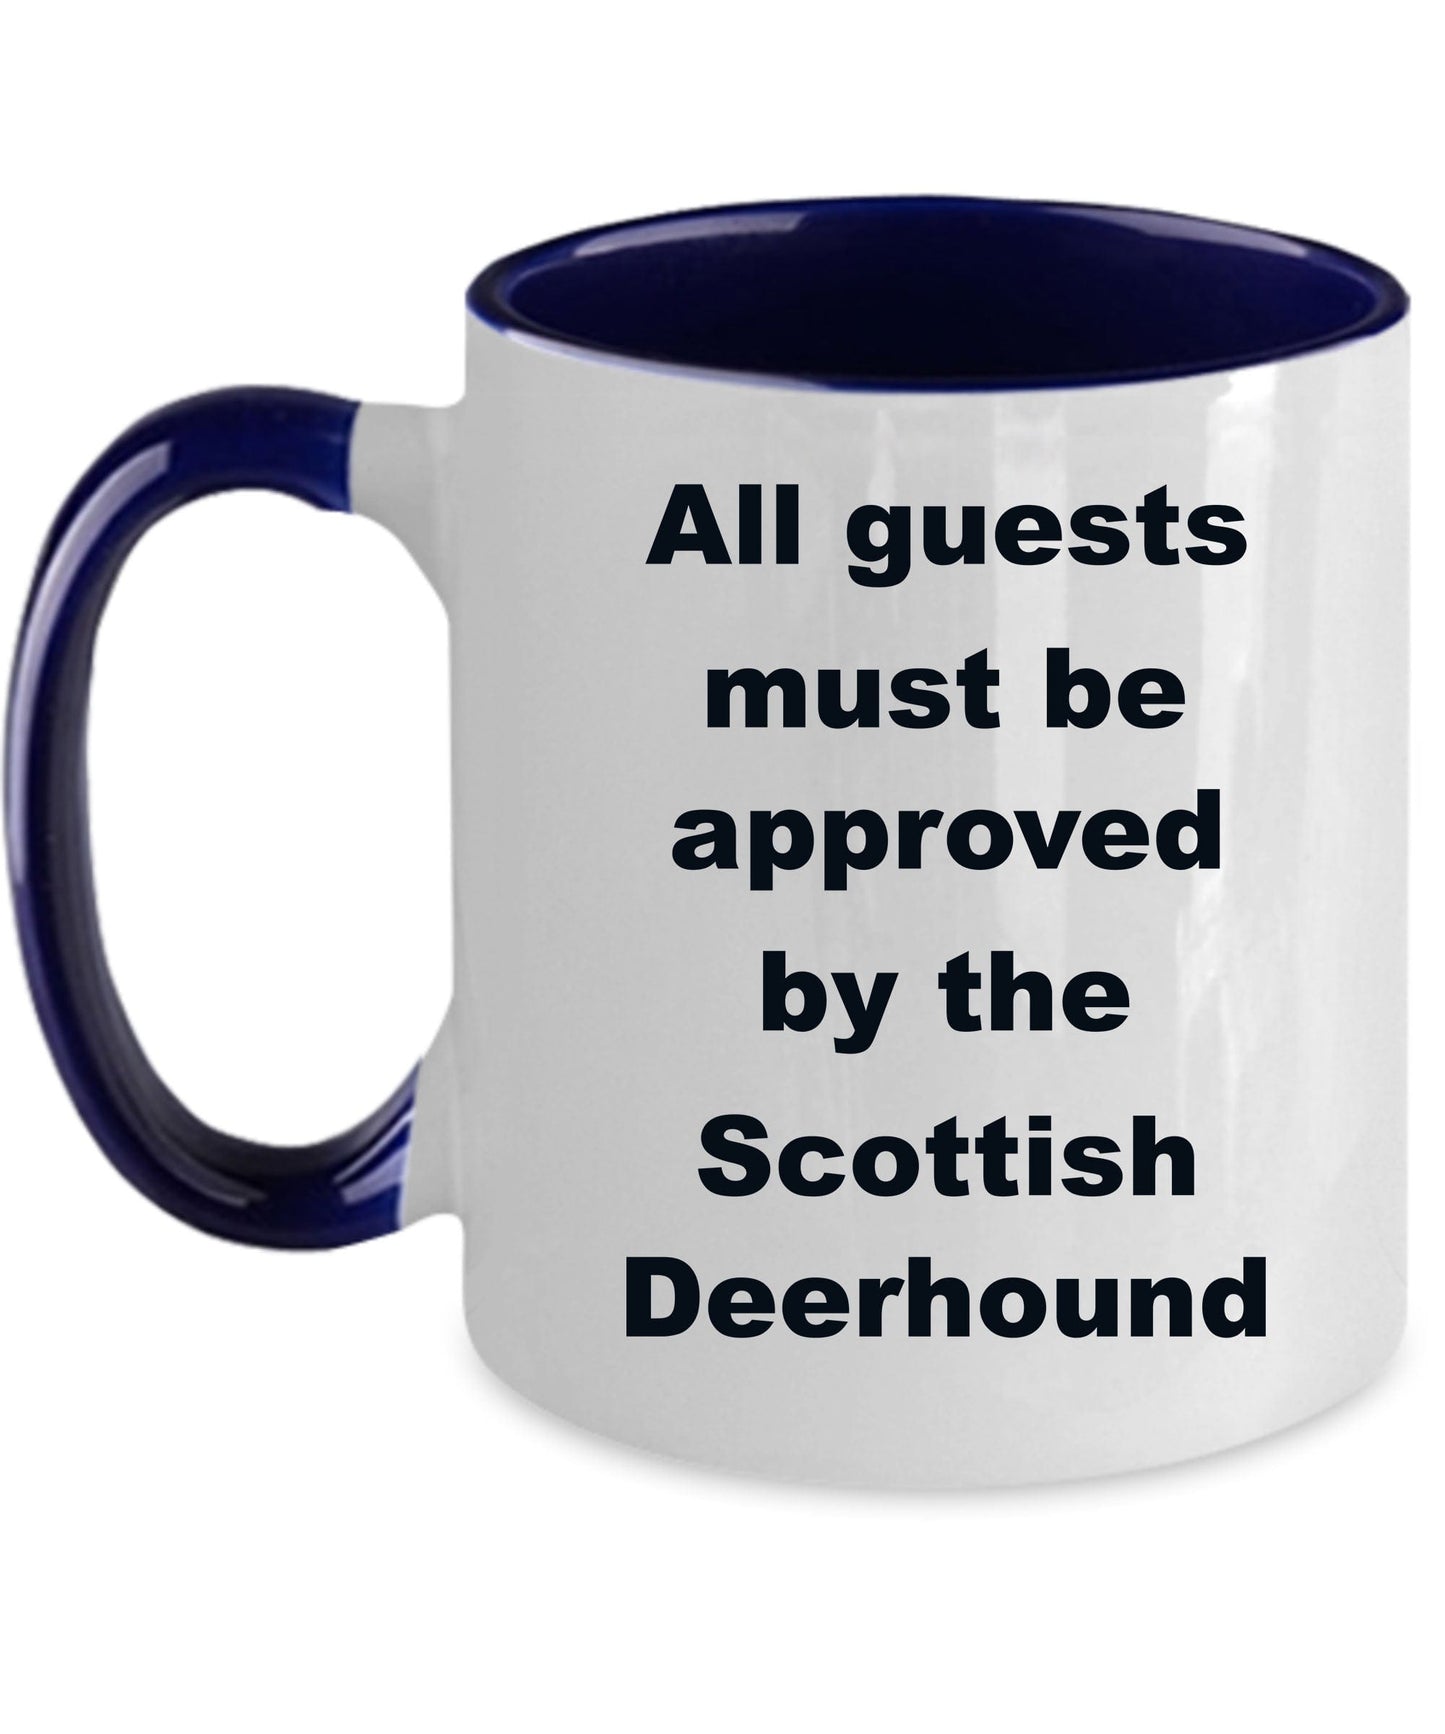 Scottish Deerhound Coffee Mug - All guests must be approved